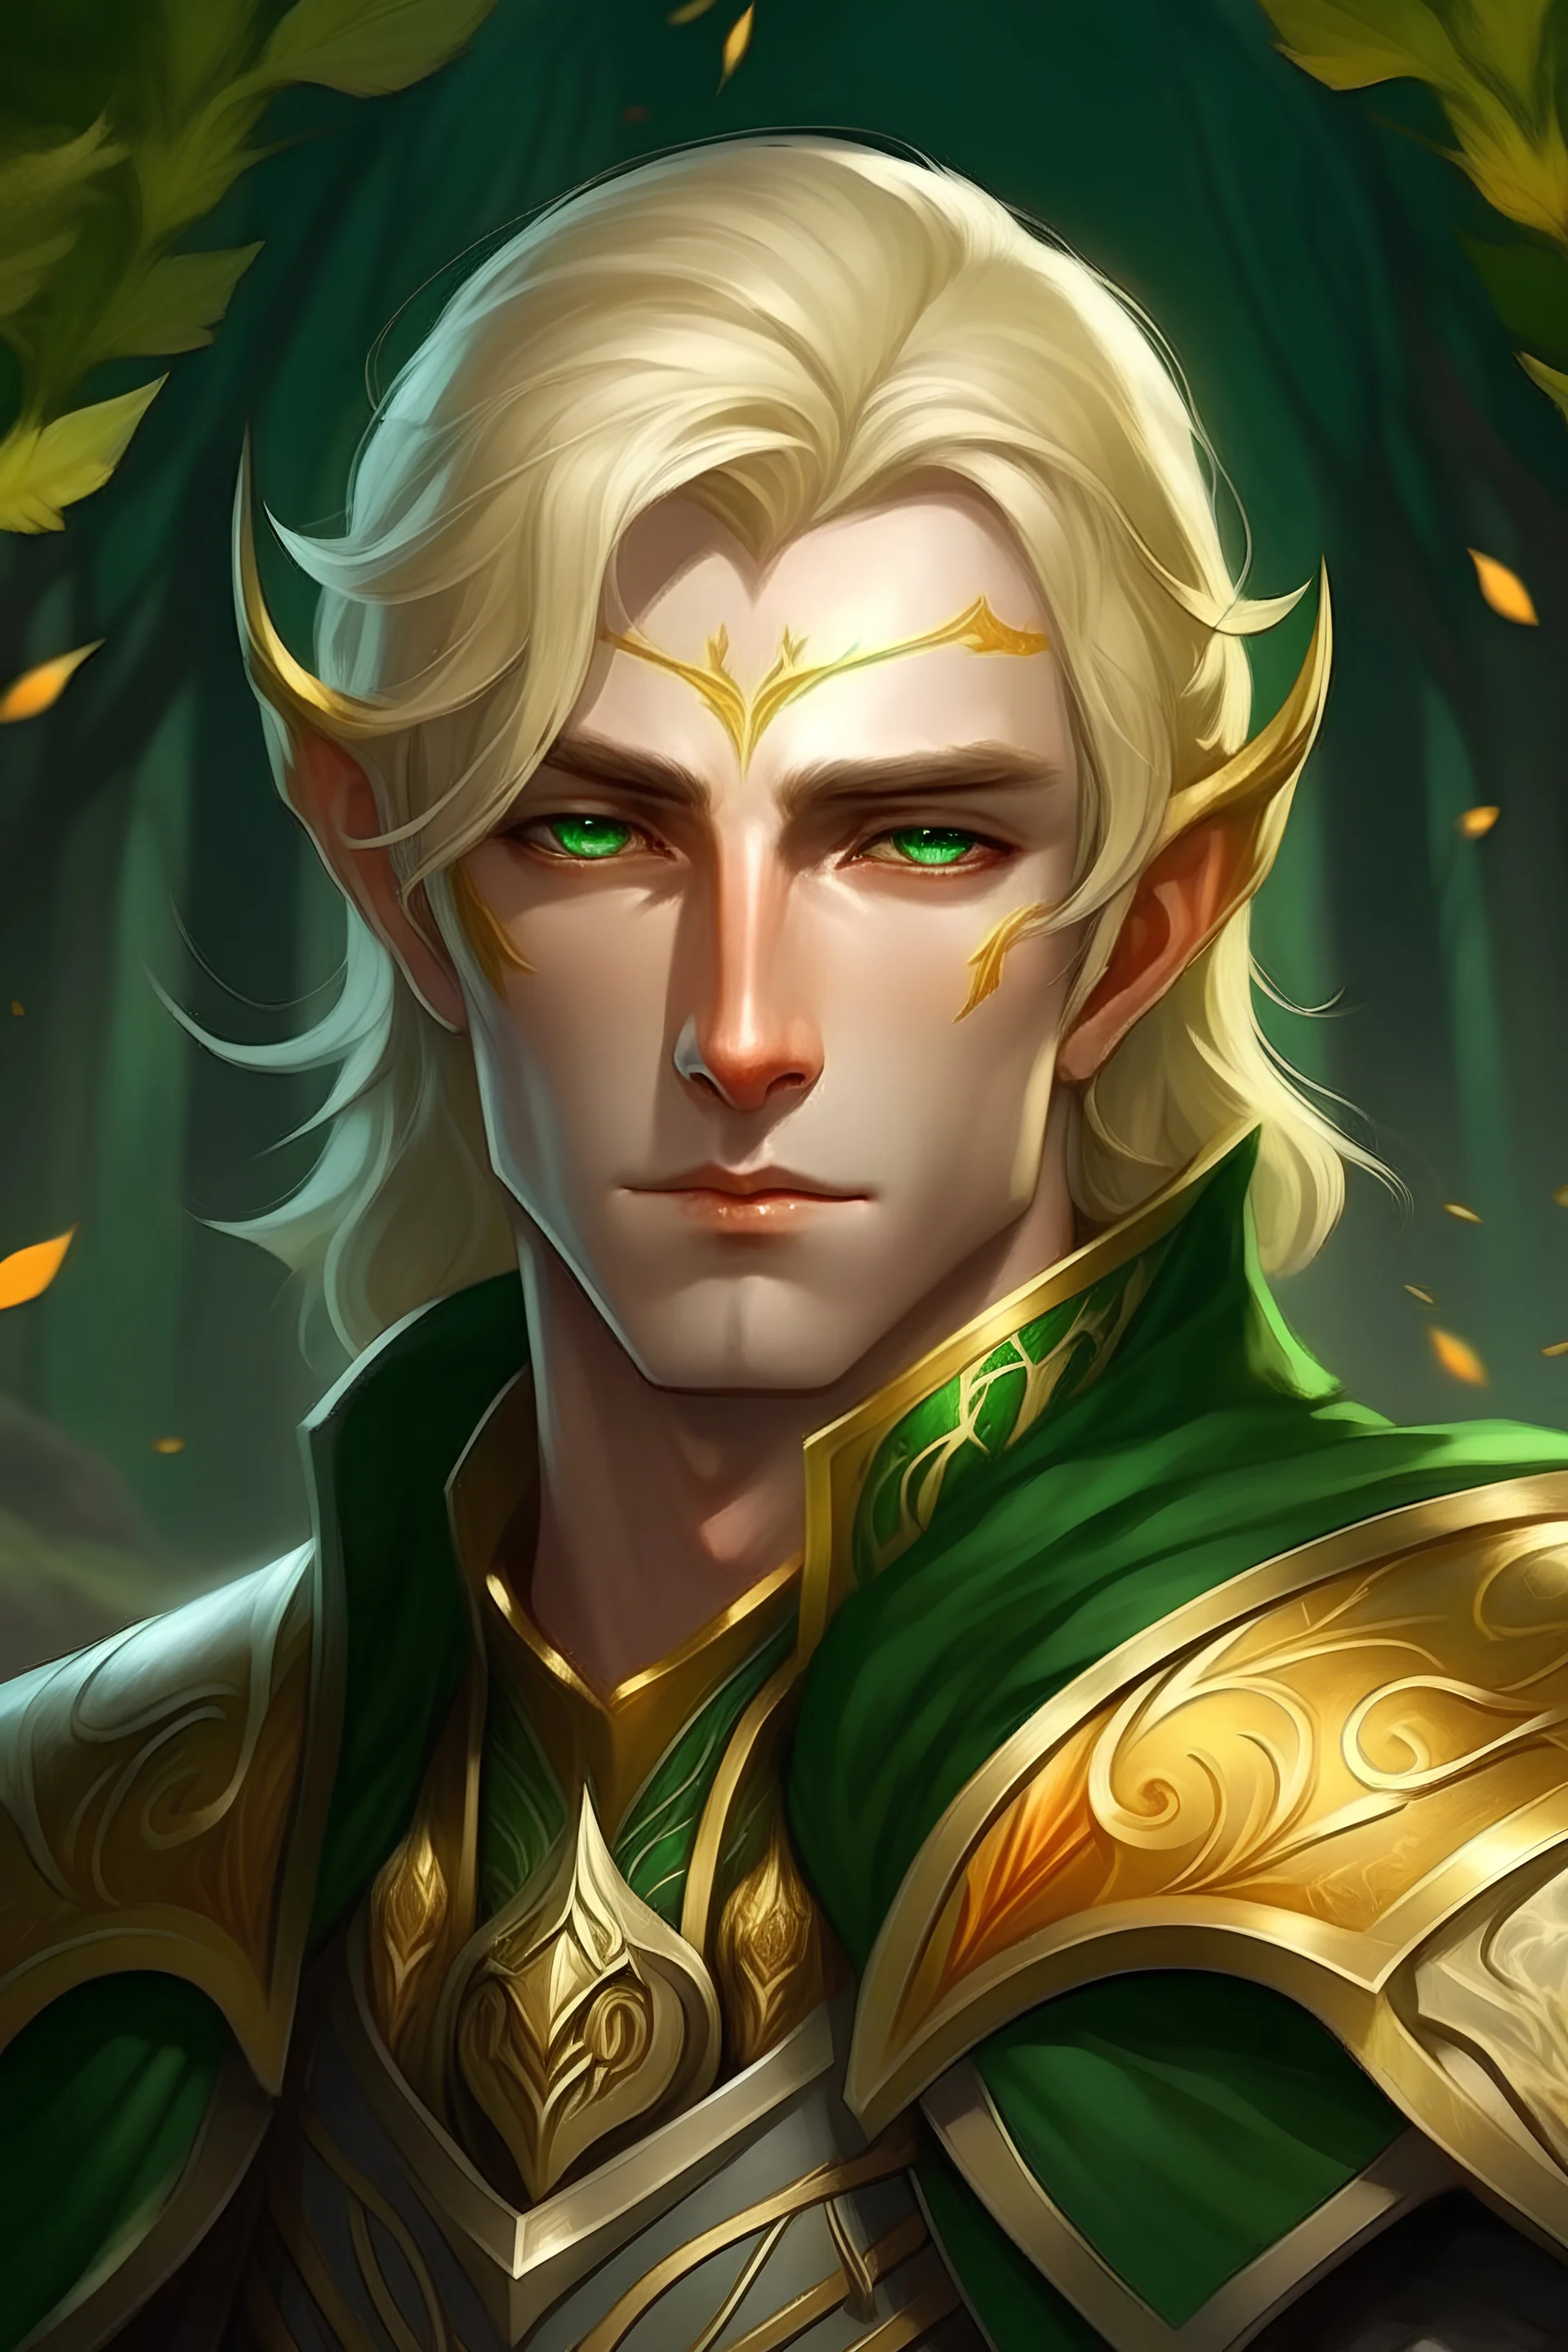 Generate male gold elf eldritch knight very handsome with light blond hair and remarkable green eyes very charismatic very smart